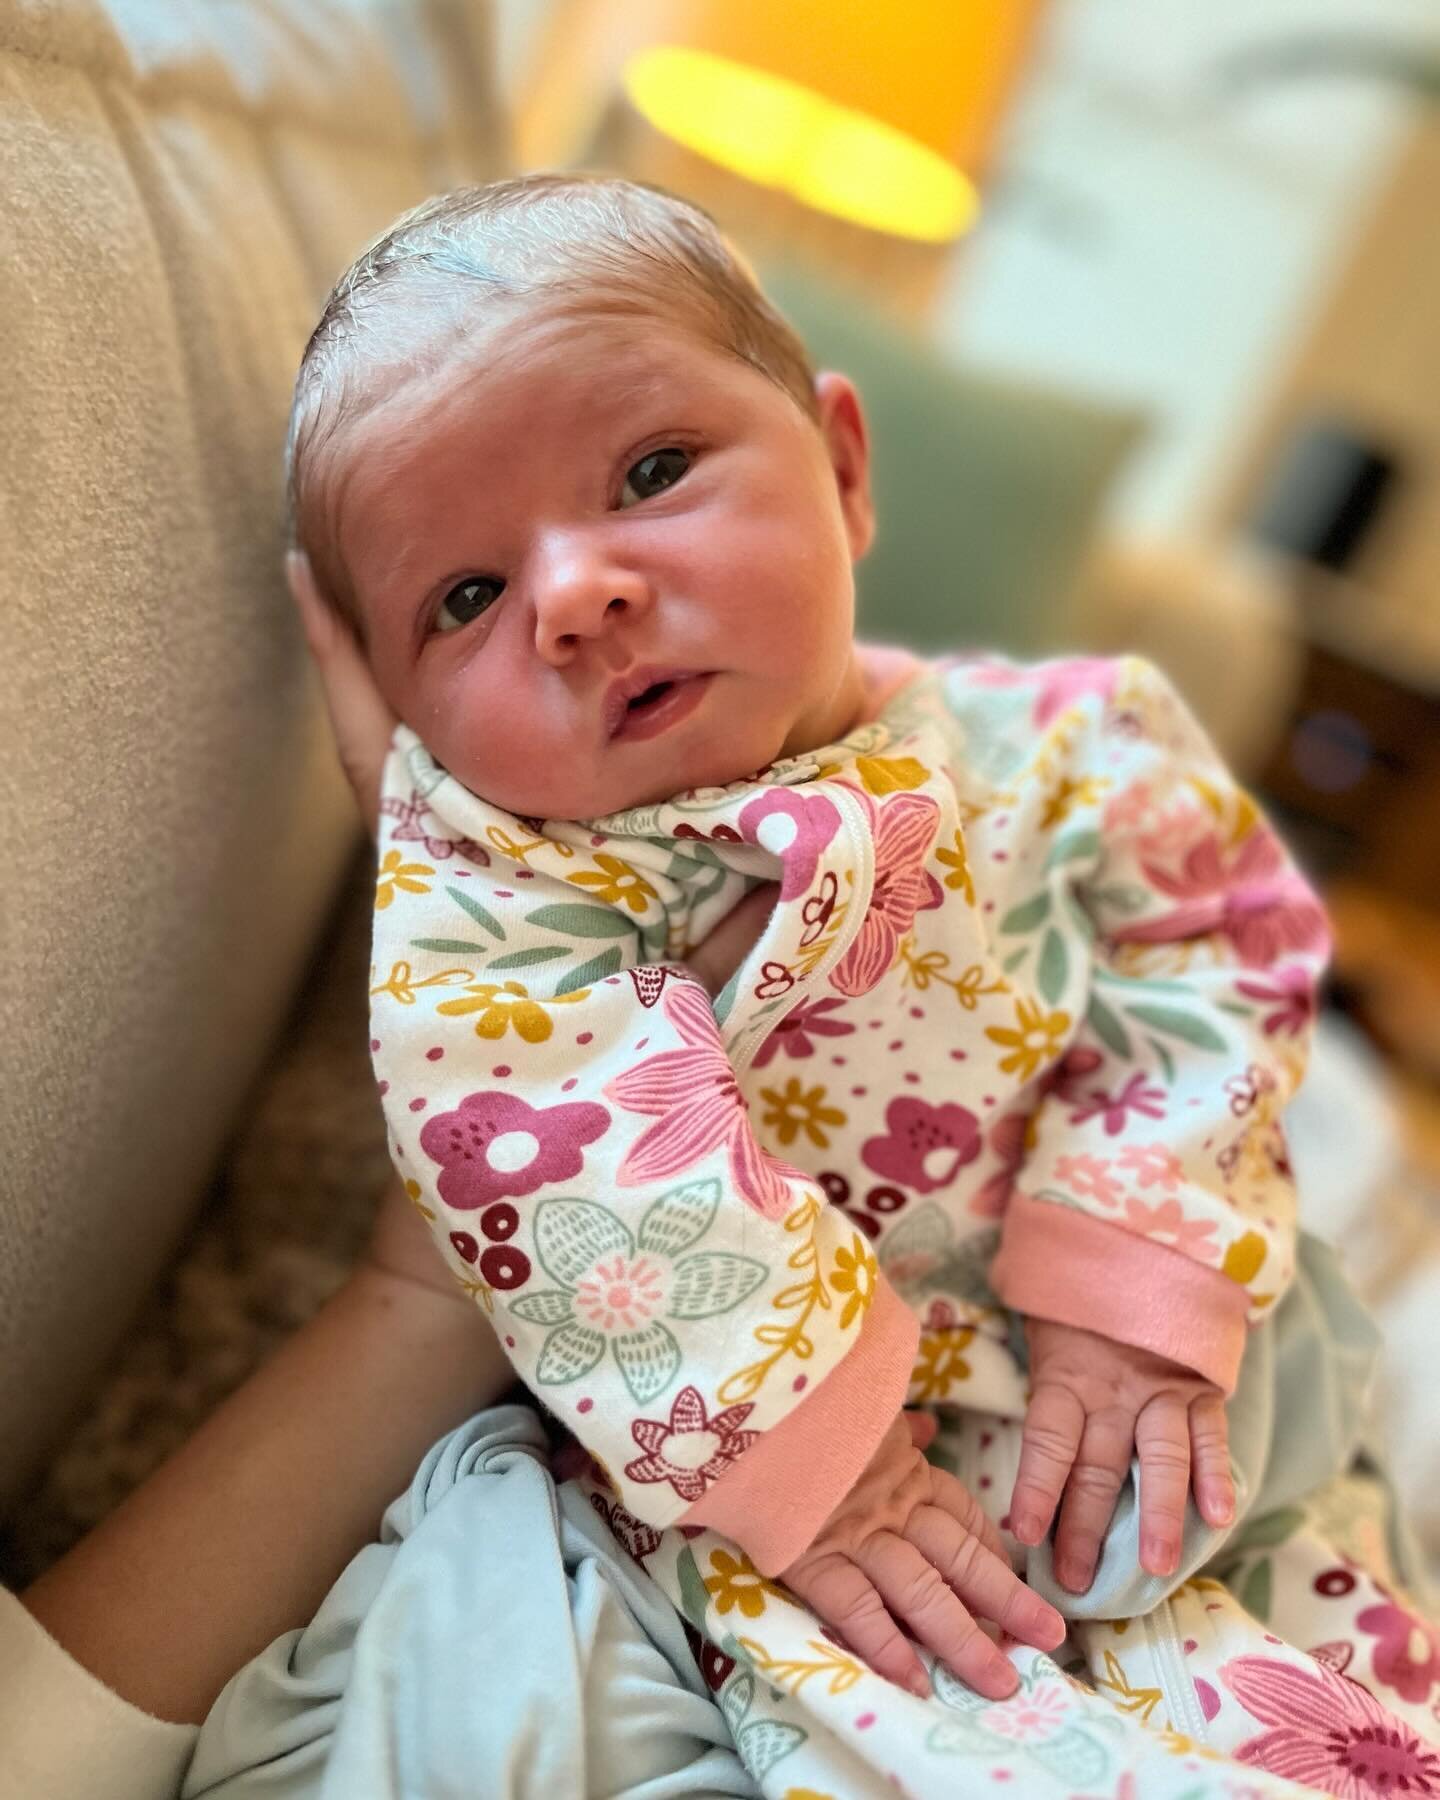 Margot Madeline Herb (named for each of our grandmothers) made her debut on Wednesday, March 6th at 6:36am ❤️ 

After a month of false labor signs that had me convinced she was going to arrive &ldquo;any second&rdquo;, and a long, peaceful night of a